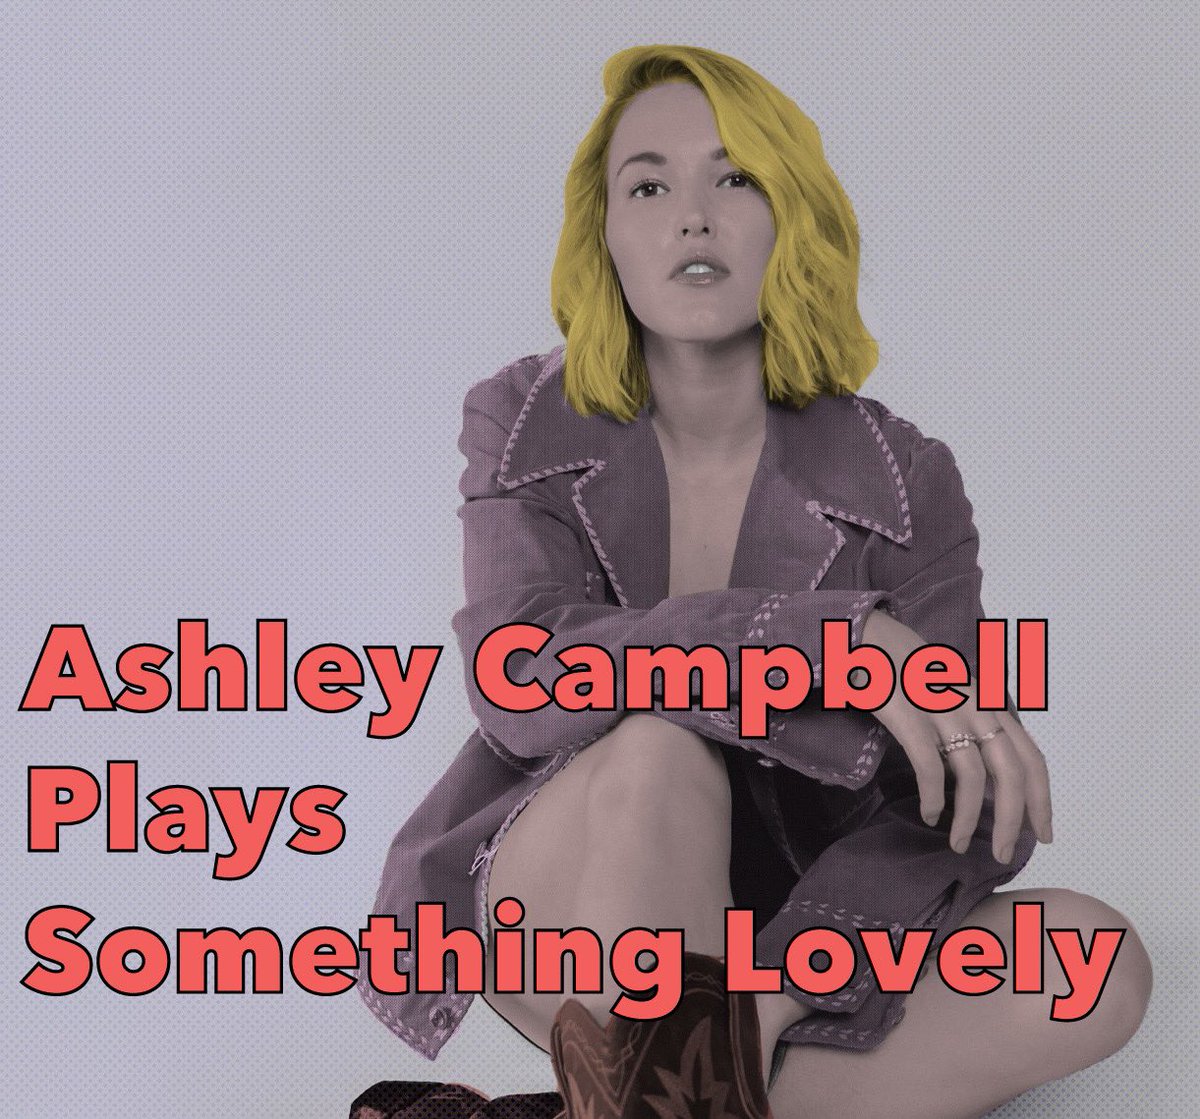 Announcement! I am moving to a new streaming platform this Sunday, Feb 20th 3pm CST. Hope to see you there! momenthouse.com/ashleycampbell